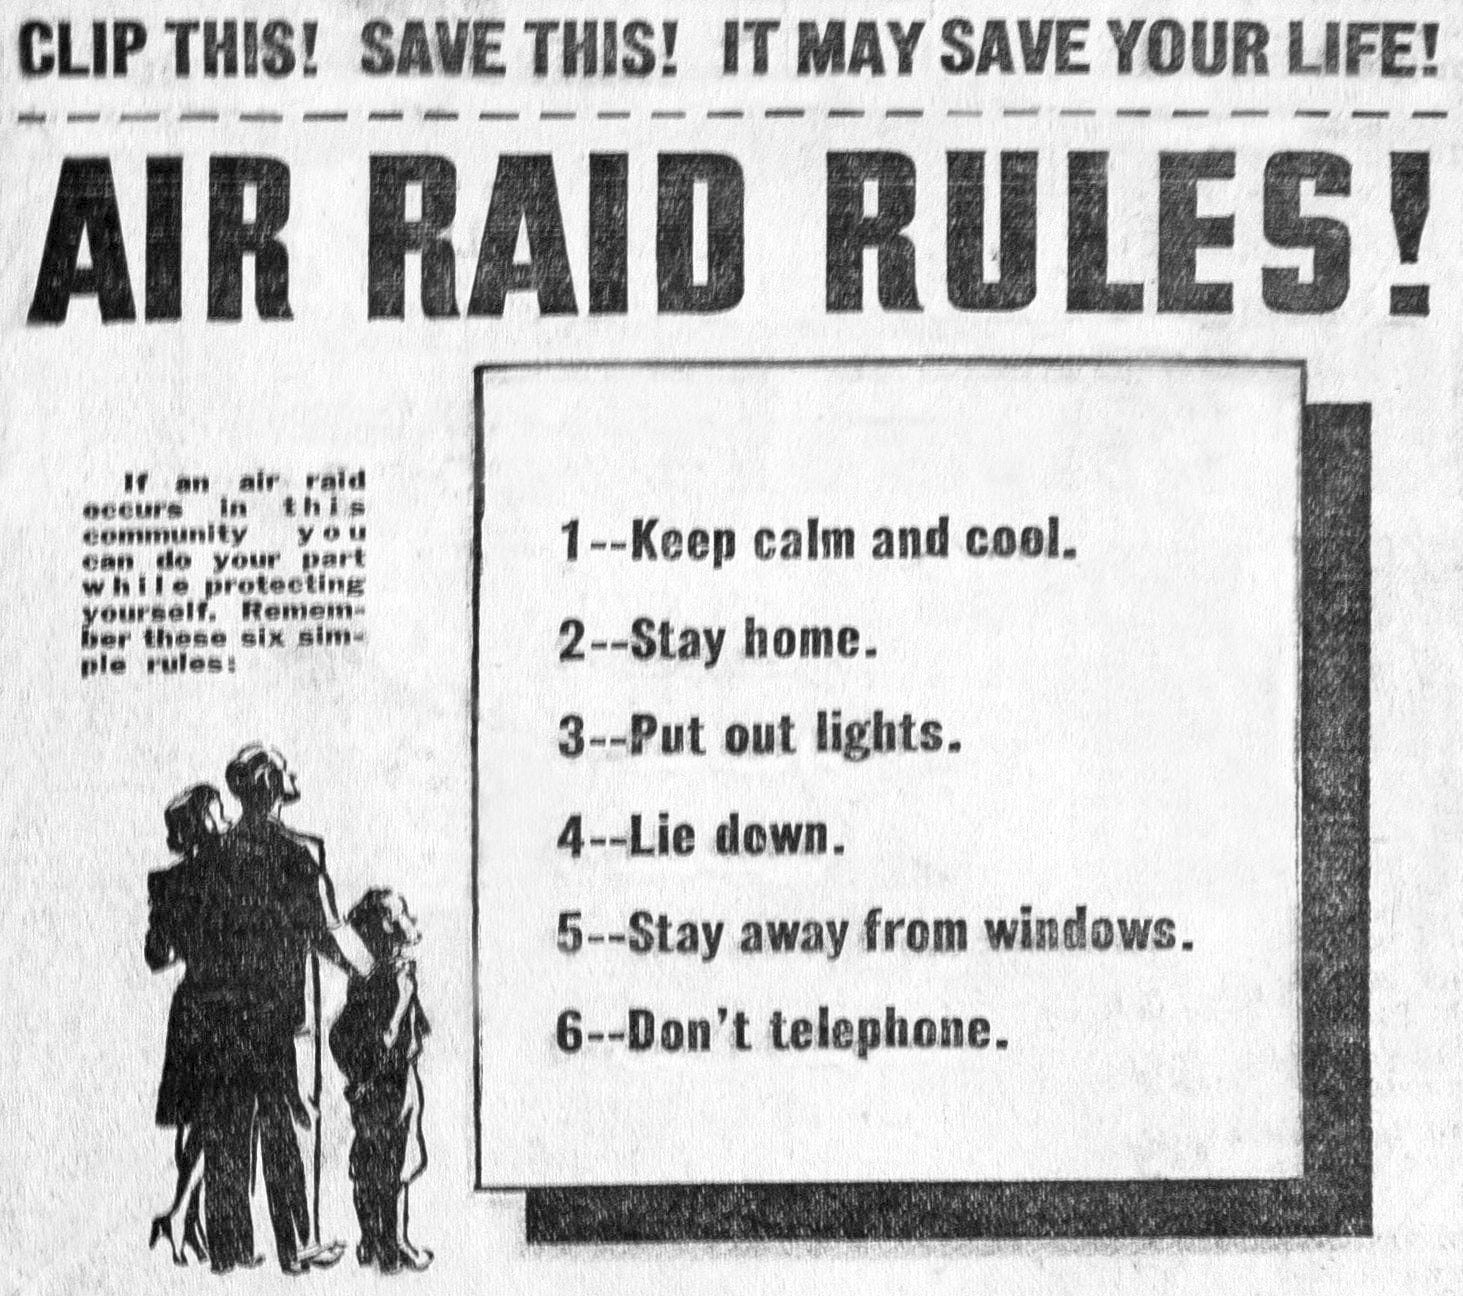 The Chehalis Advocate outlined air raid rules in this news clipping.